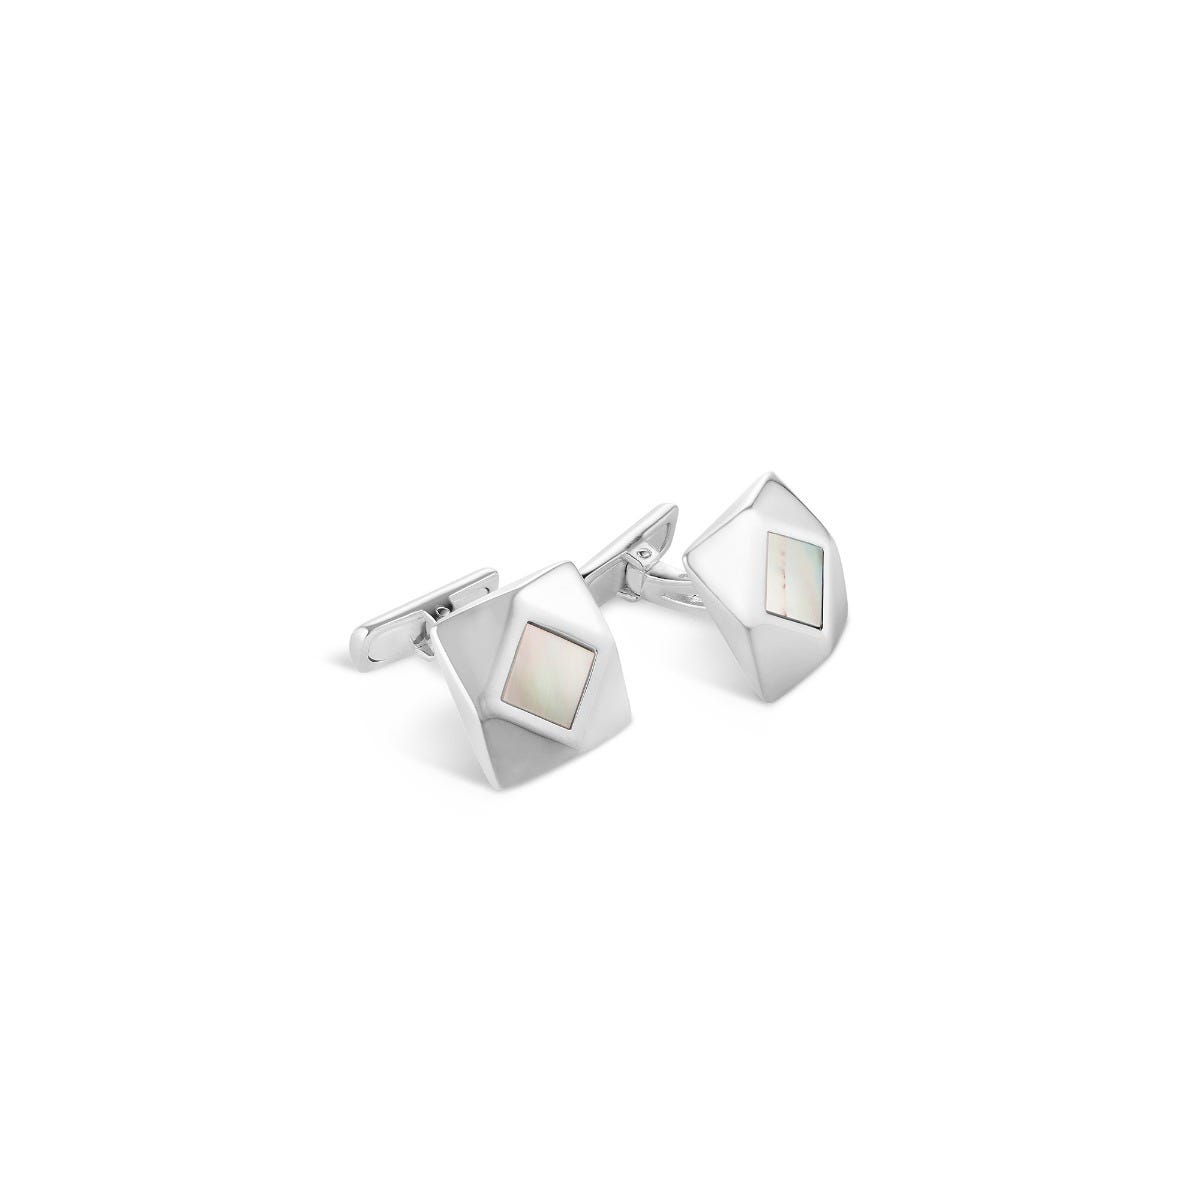 Geometric Mother of Pearl Cufflinks in Sterling Silver